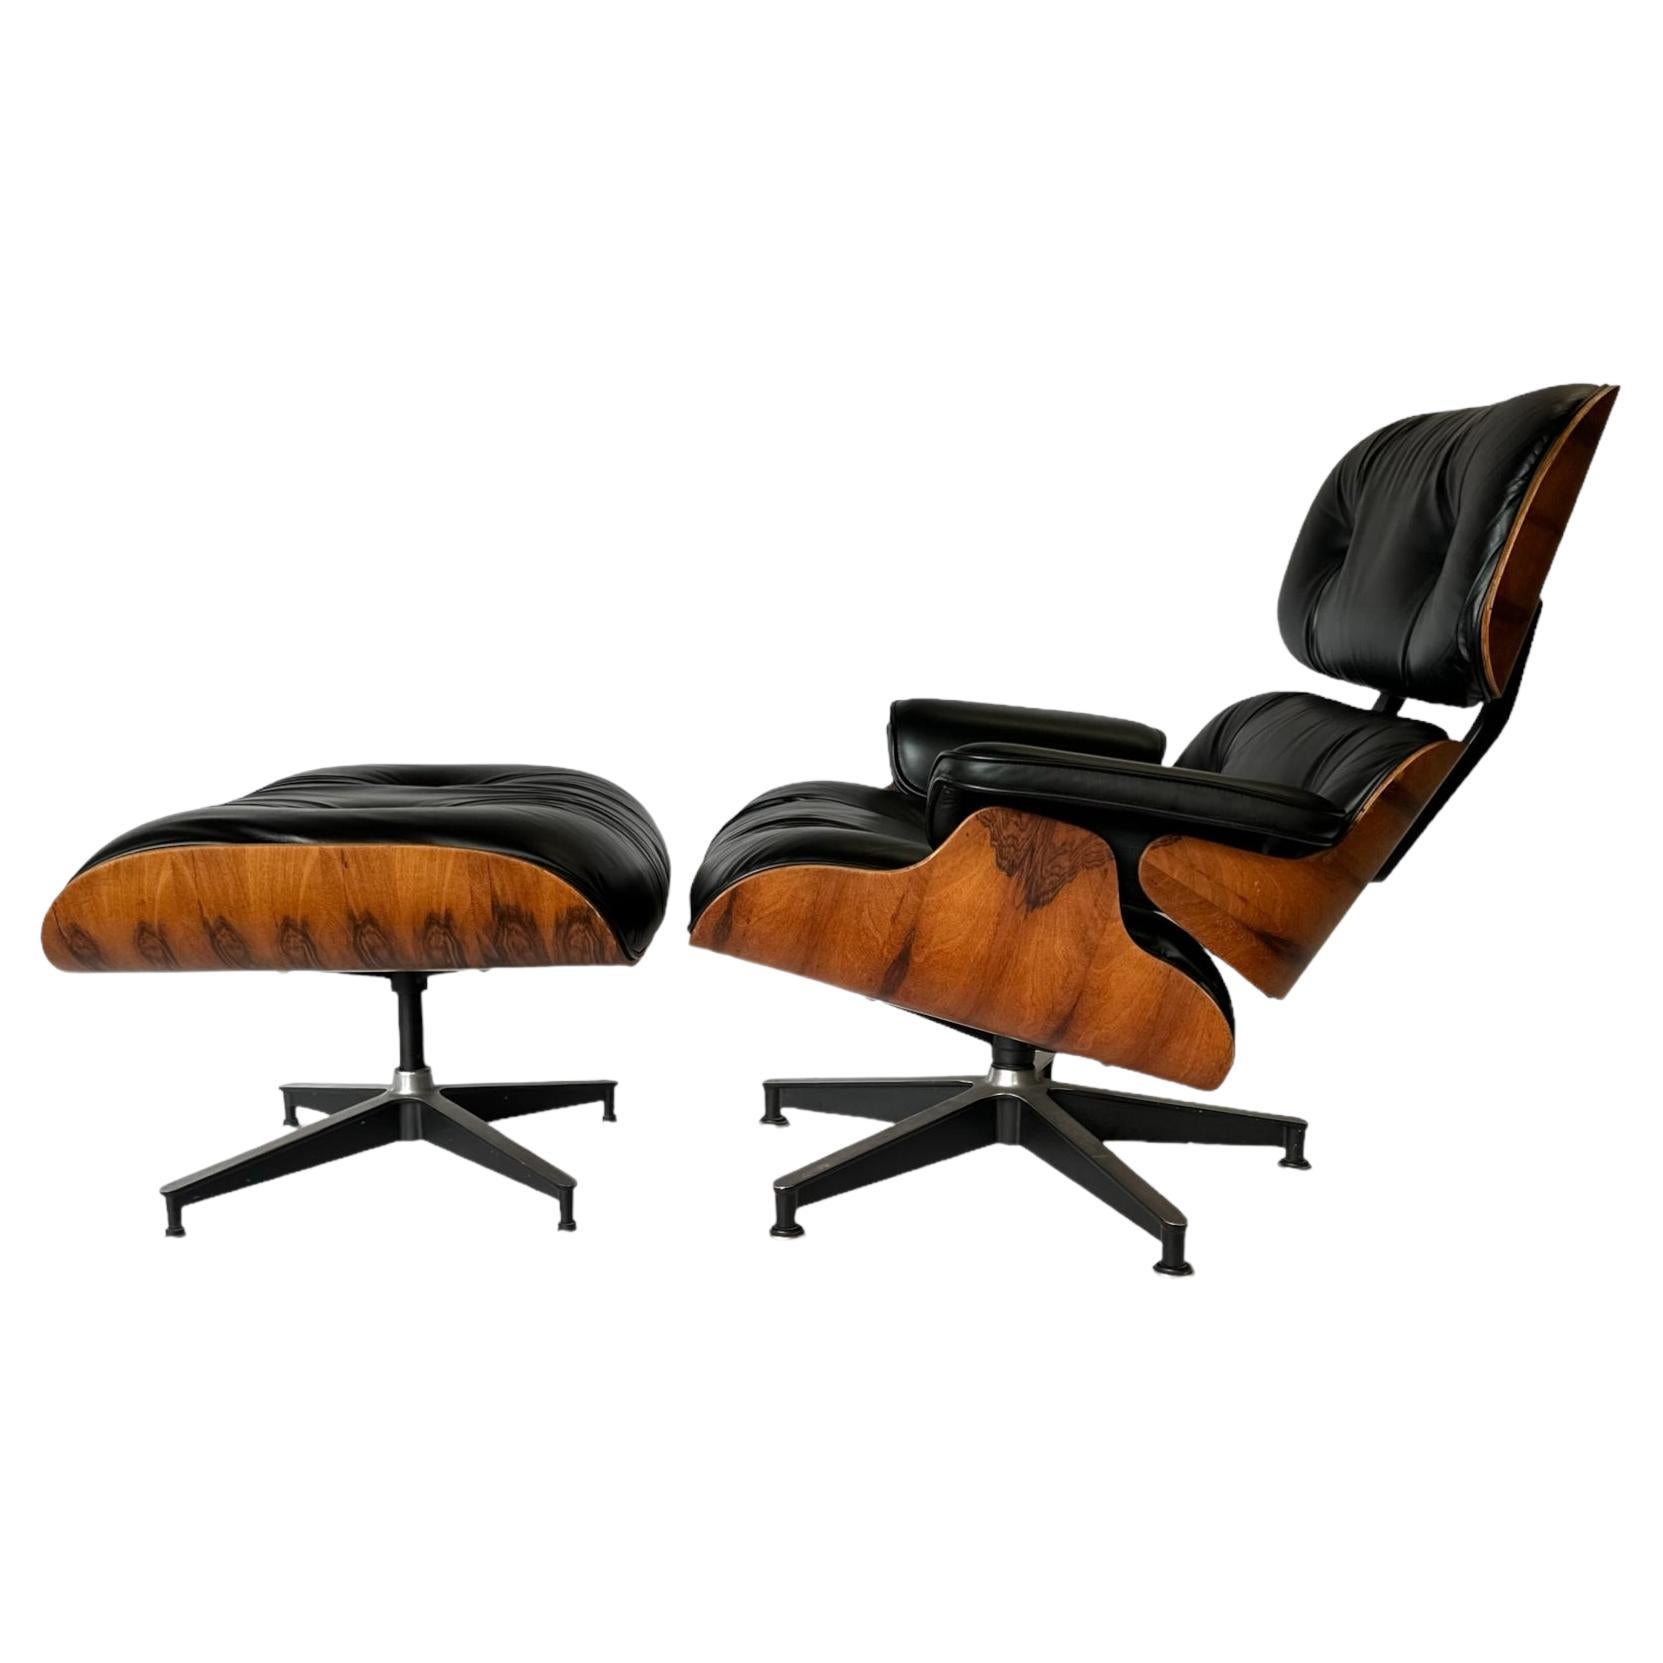 Restored Herman Miller Eames Lounge and Ottoman